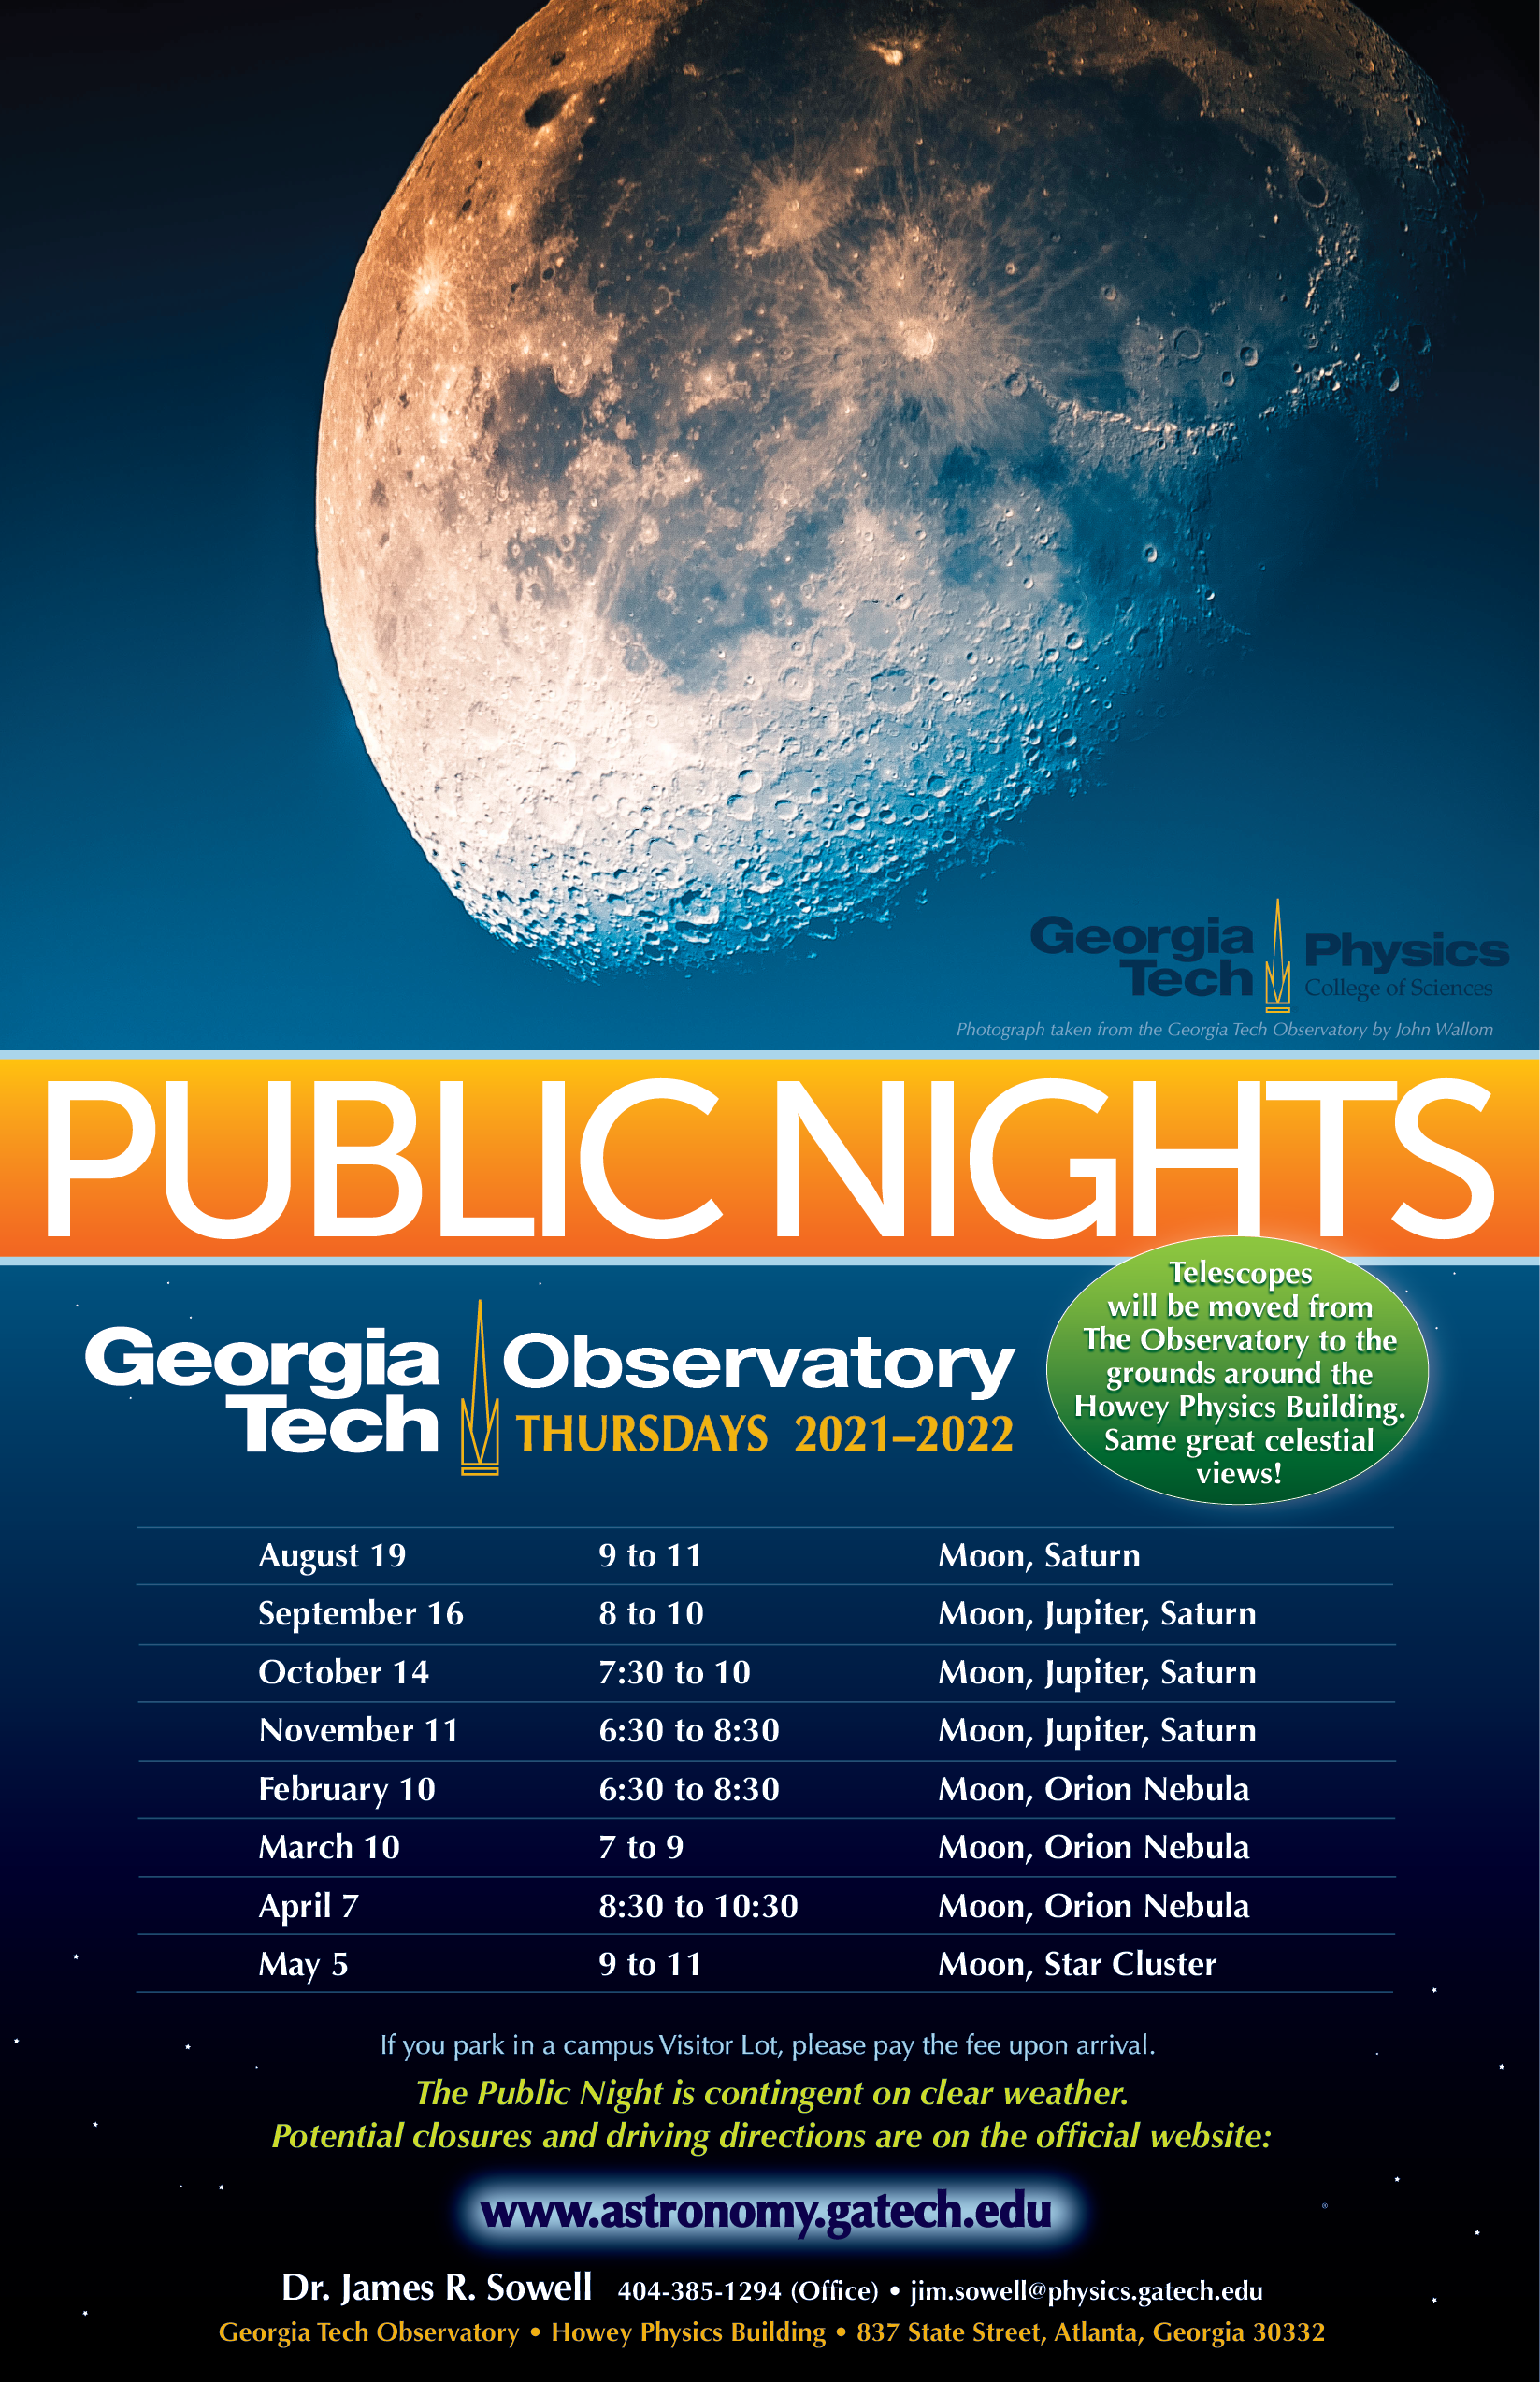 Public Nights at the Georgia Tech Observatory